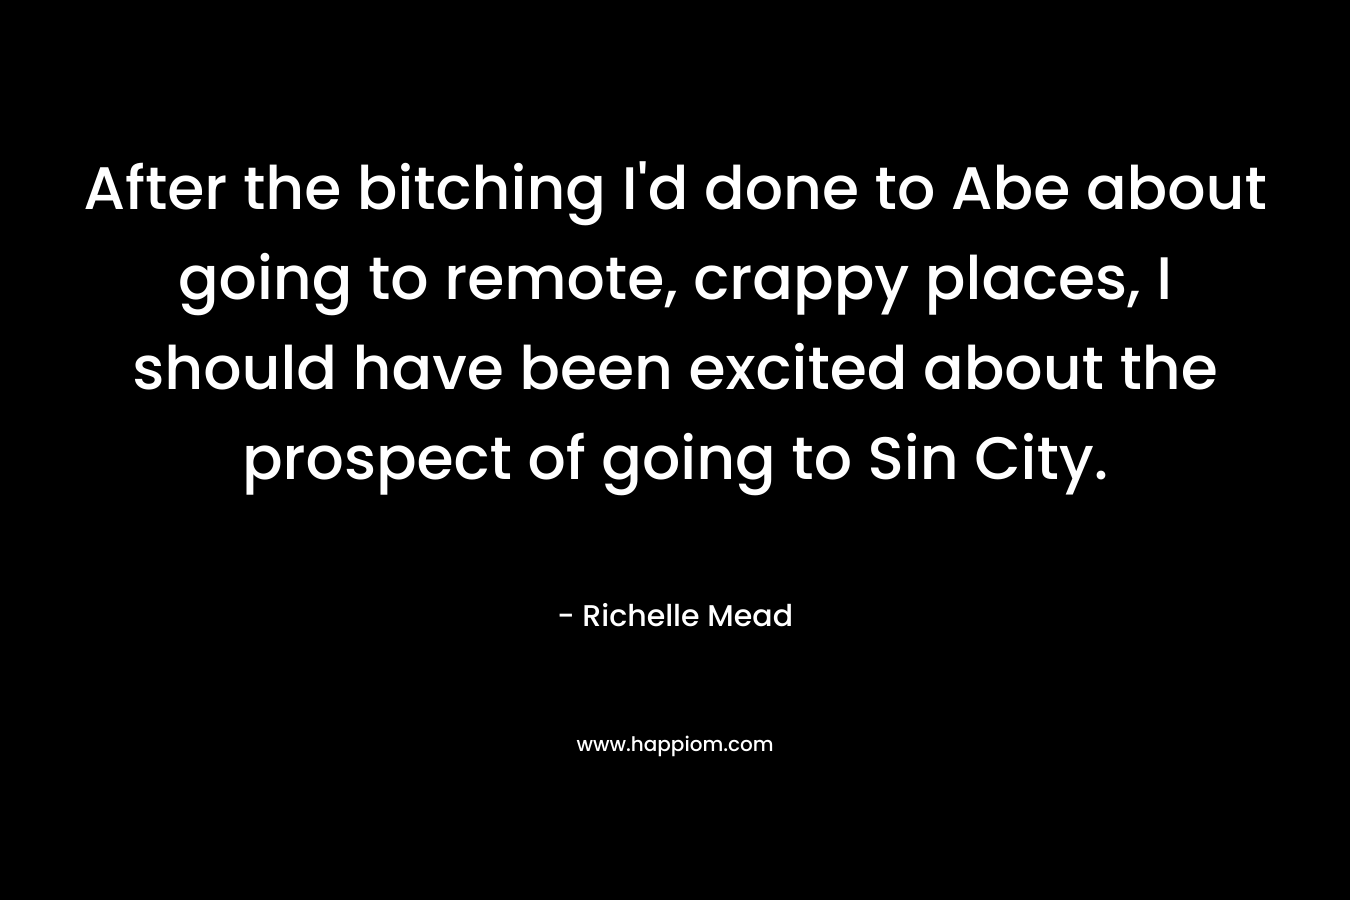 After the bitching I'd done to Abe about going to remote, crappy places, I should have been excited about the prospect of going to Sin City.